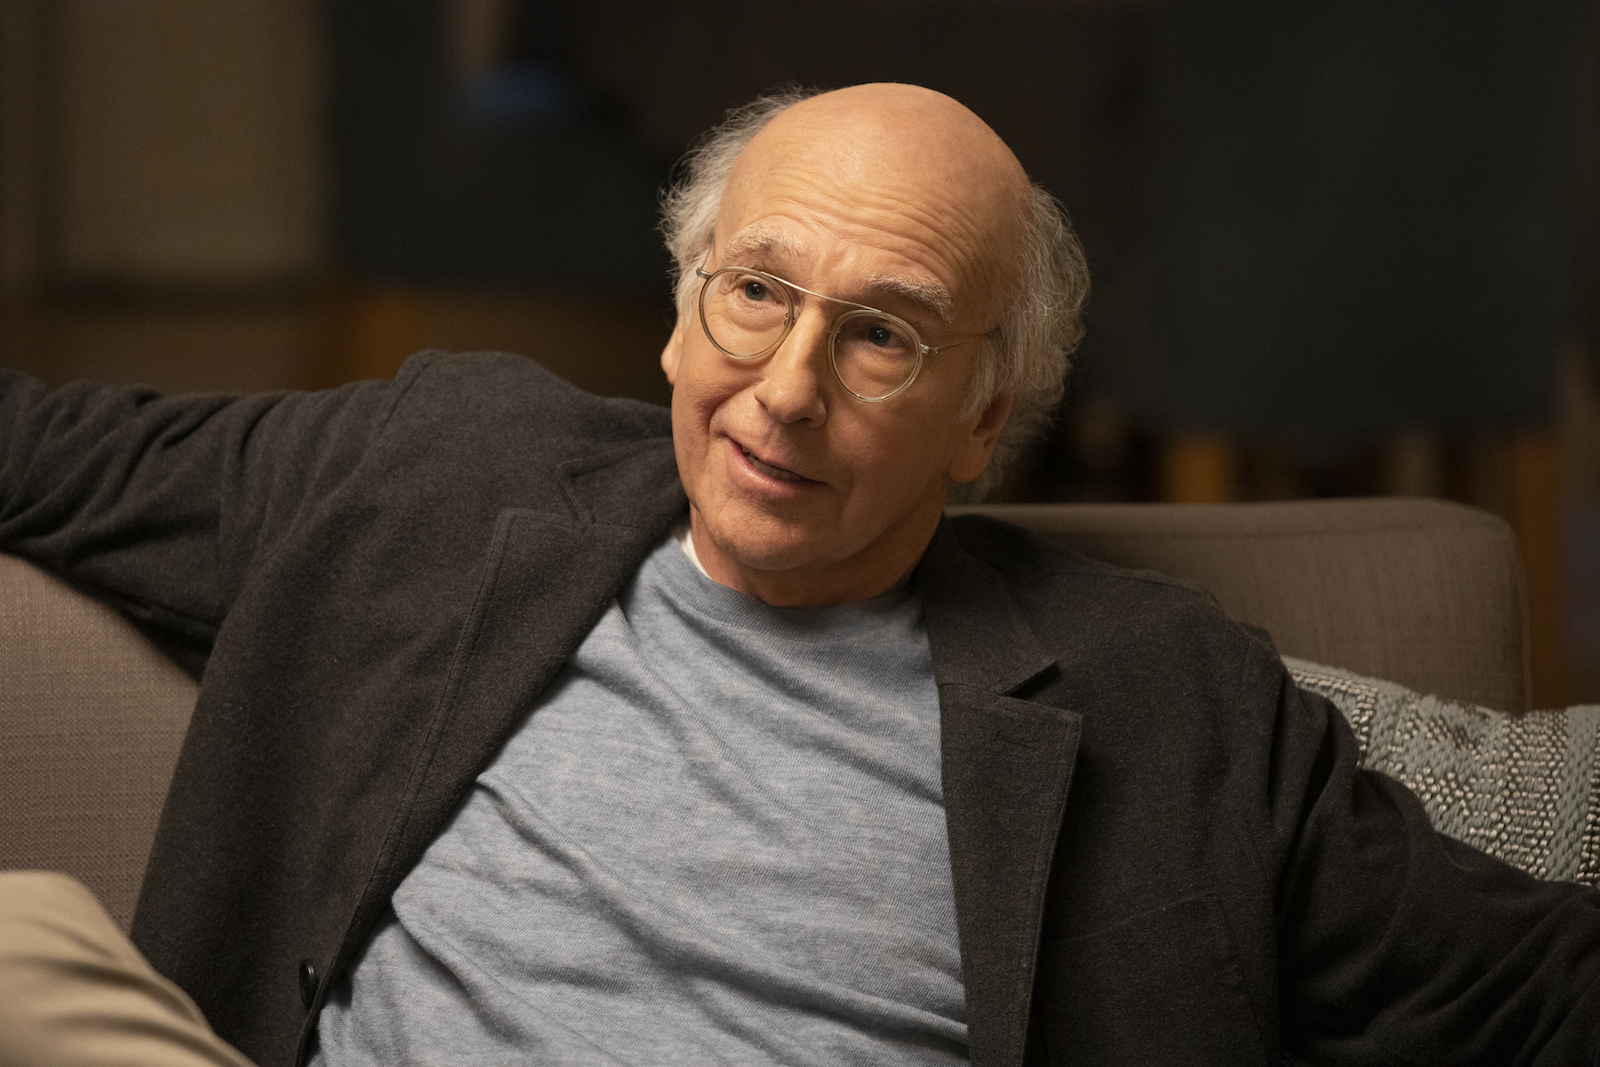 'Curb Your Enthusiasm' is finally lowering the curtain and its time to see what the cast has to say about its storied history.